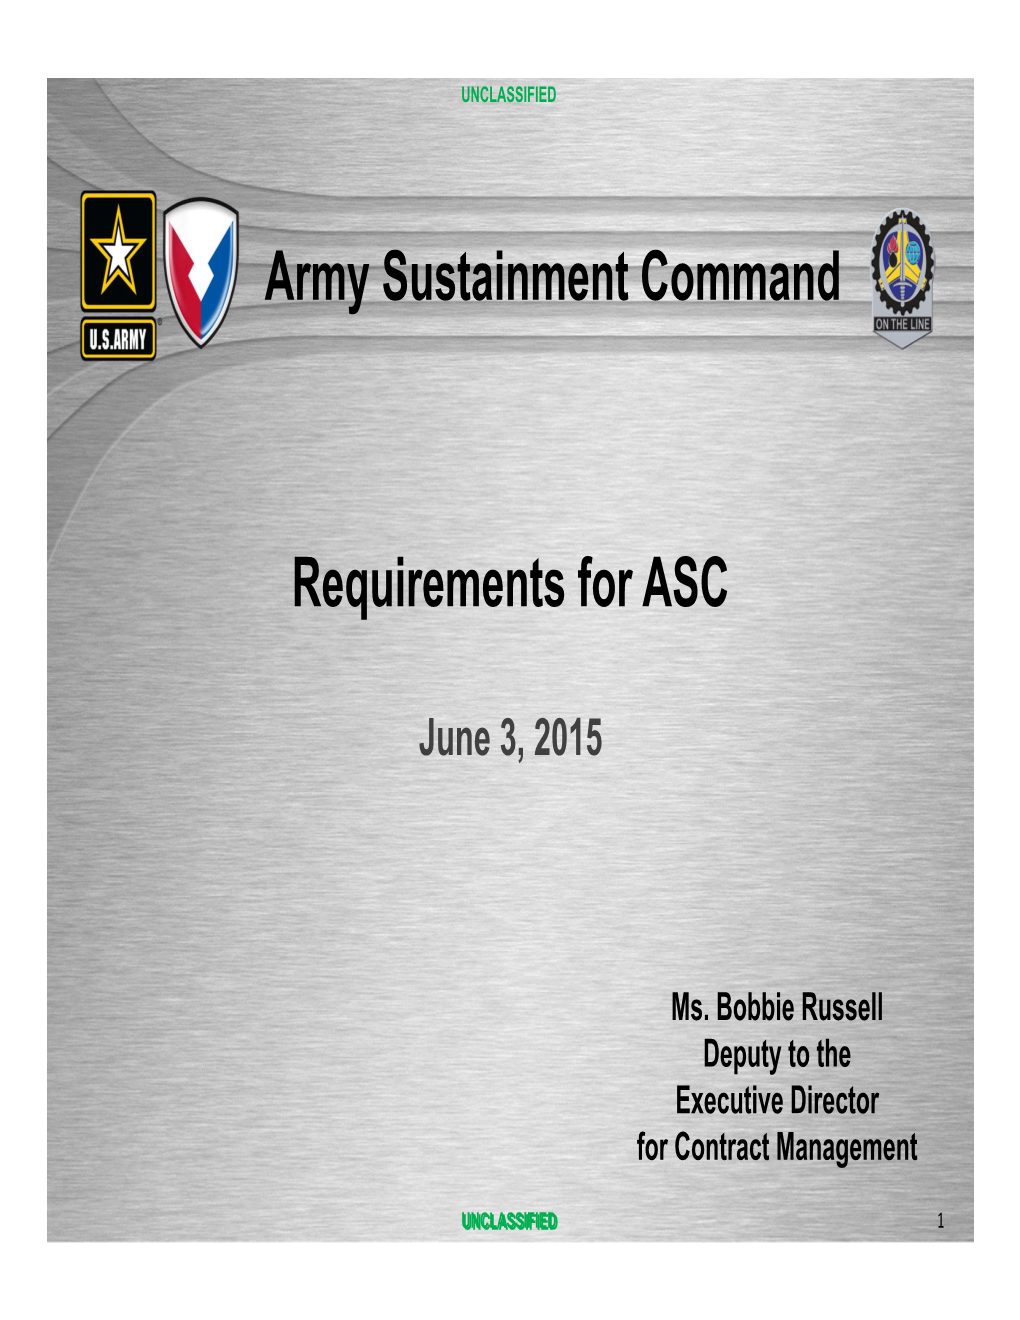 Requirements for ASC Army Sustainment Command